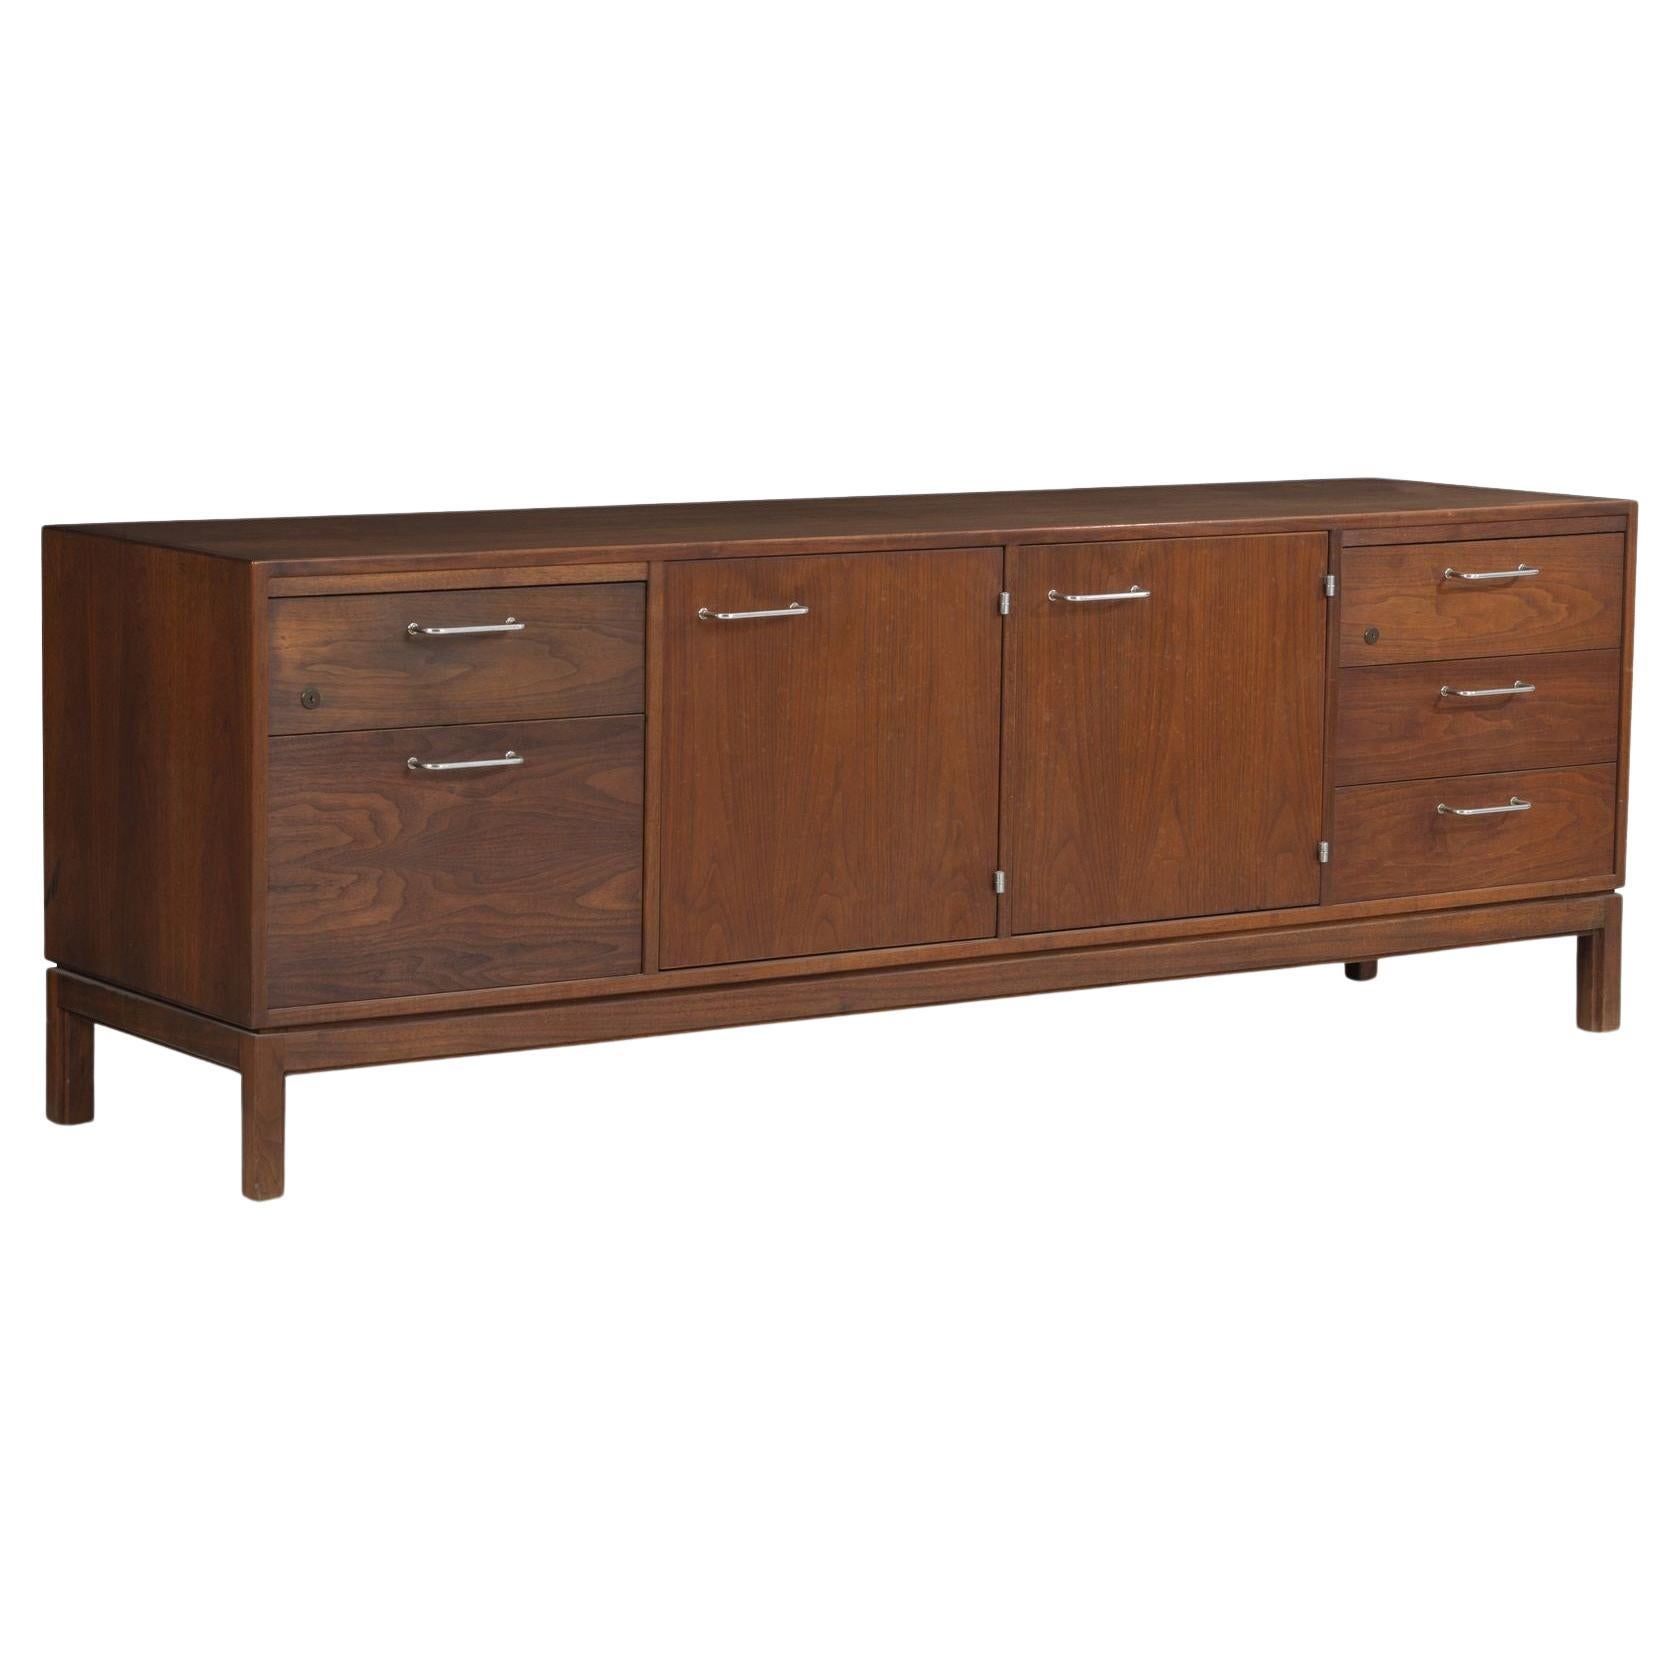 Jens Risom Credenza in Oiled Walnut For Sale